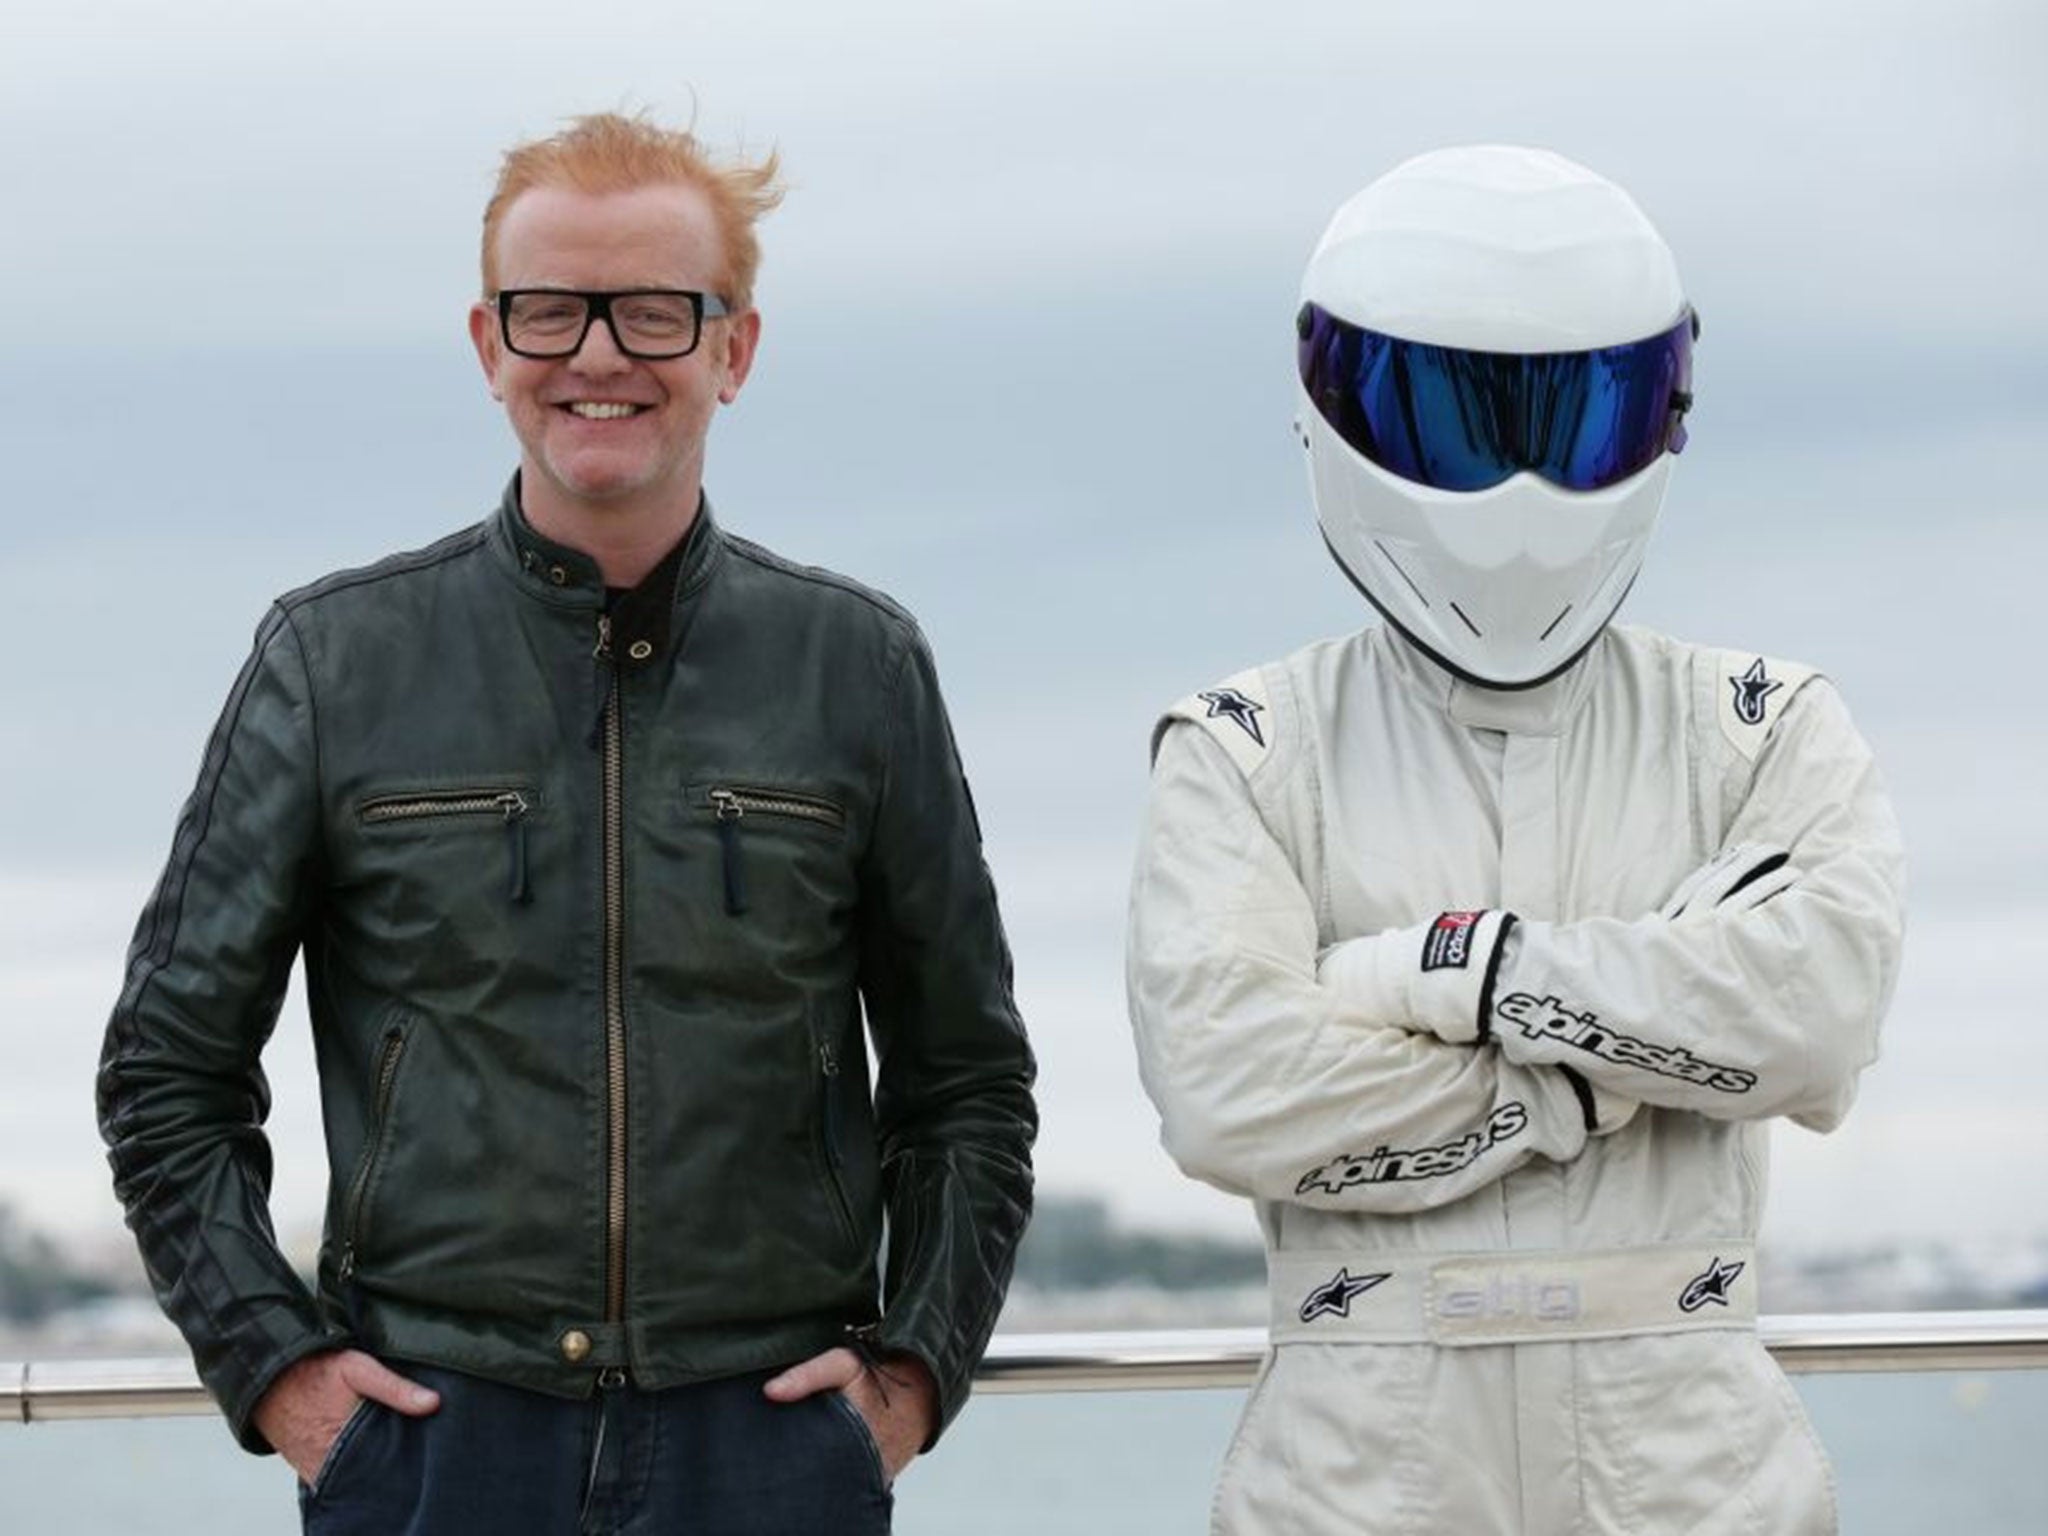 Chris Evans has hinted that The Stig will return in the latest series